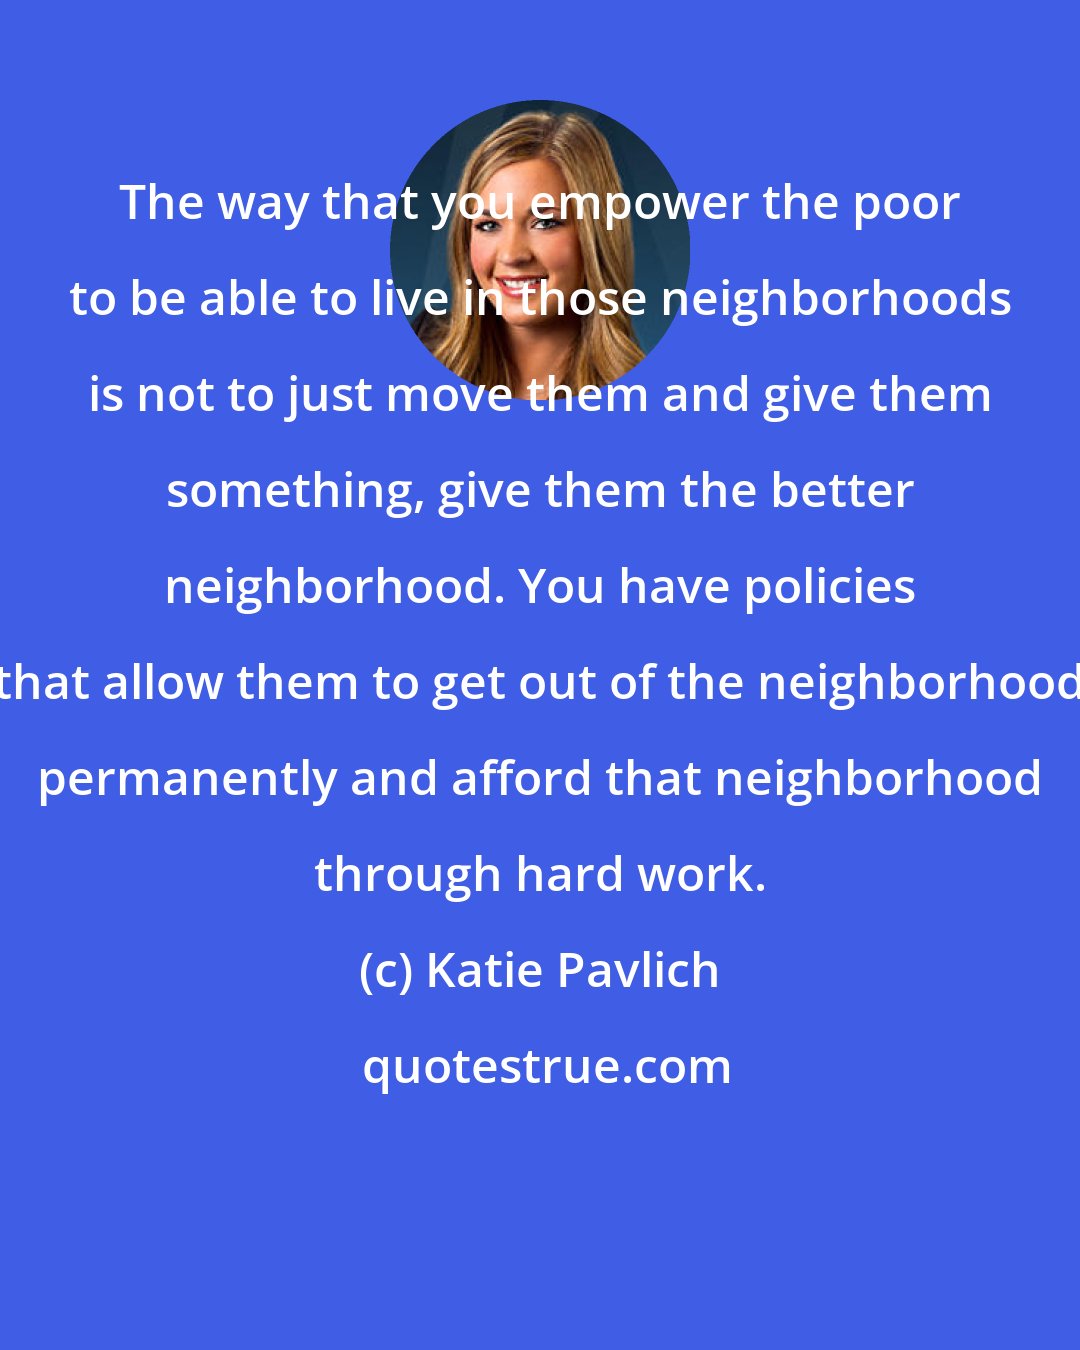 Katie Pavlich: The way that you empower the poor to be able to live in those neighborhoods is not to just move them and give them something, give them the better neighborhood. You have policies that allow them to get out of the neighborhood permanently and afford that neighborhood through hard work.